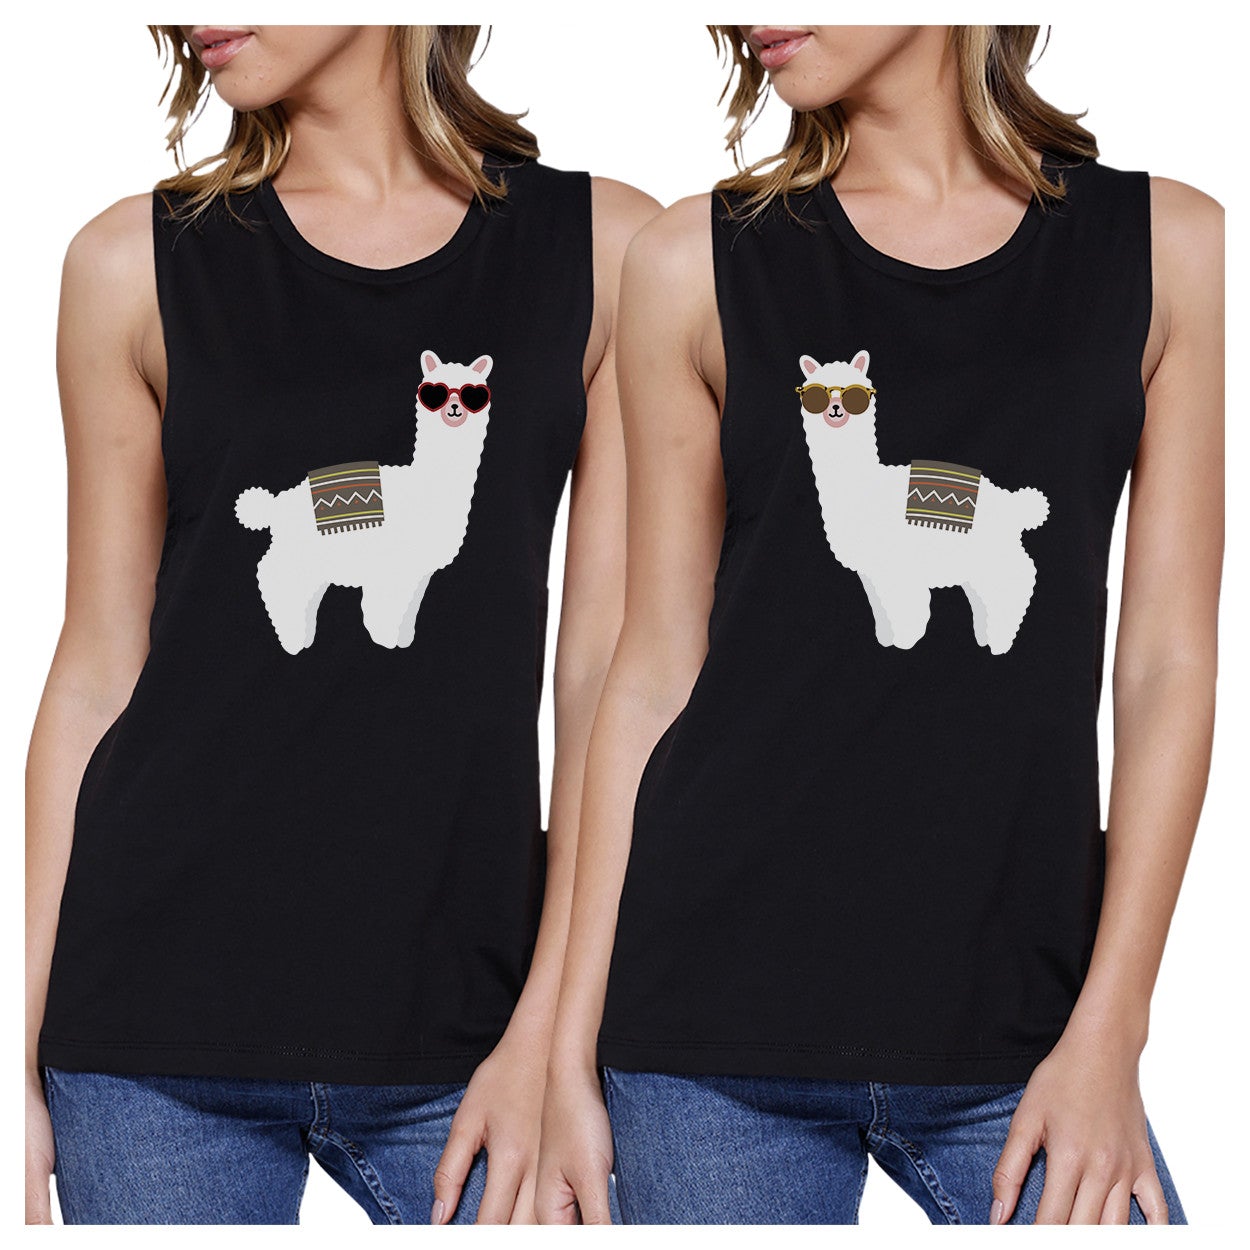 Llamas With Sunglasses BFF Matching Black Muscle Tops